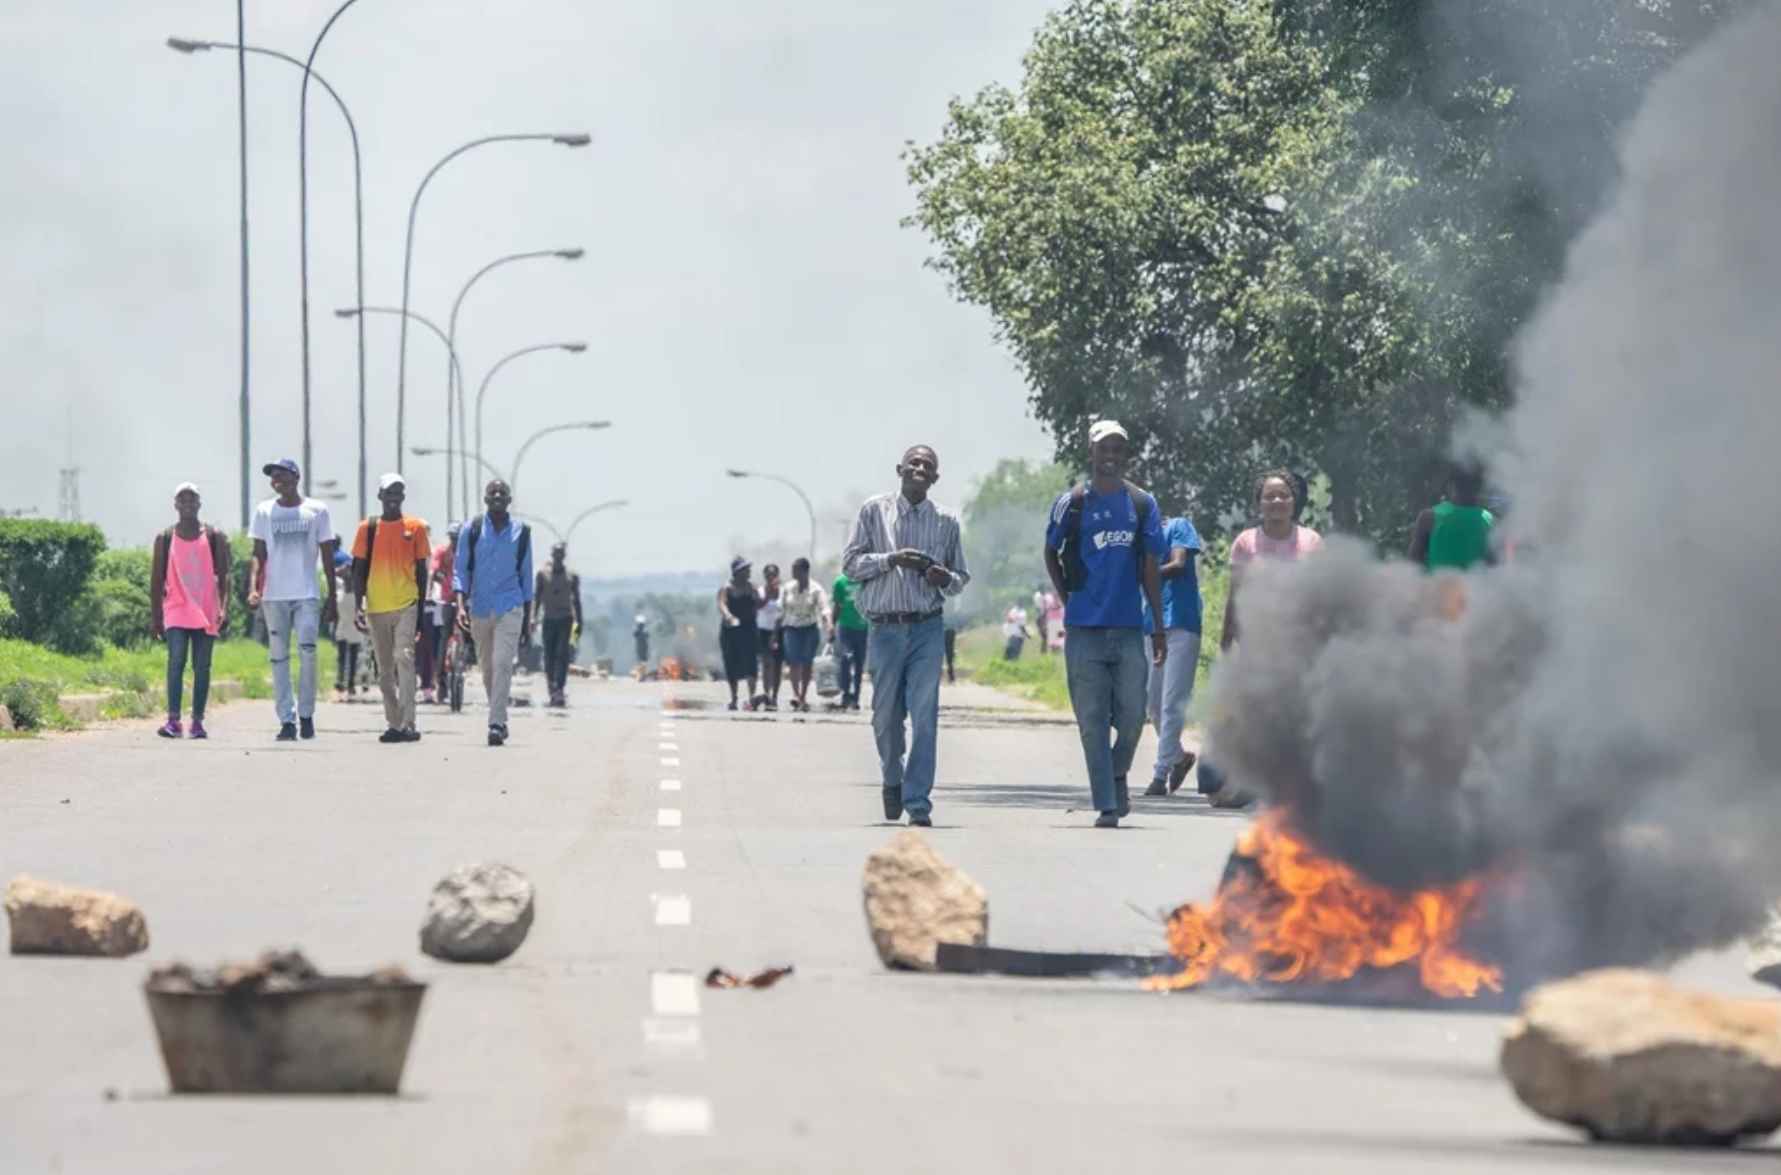 Zimbabwe anti-government protest strike enters 3rd day